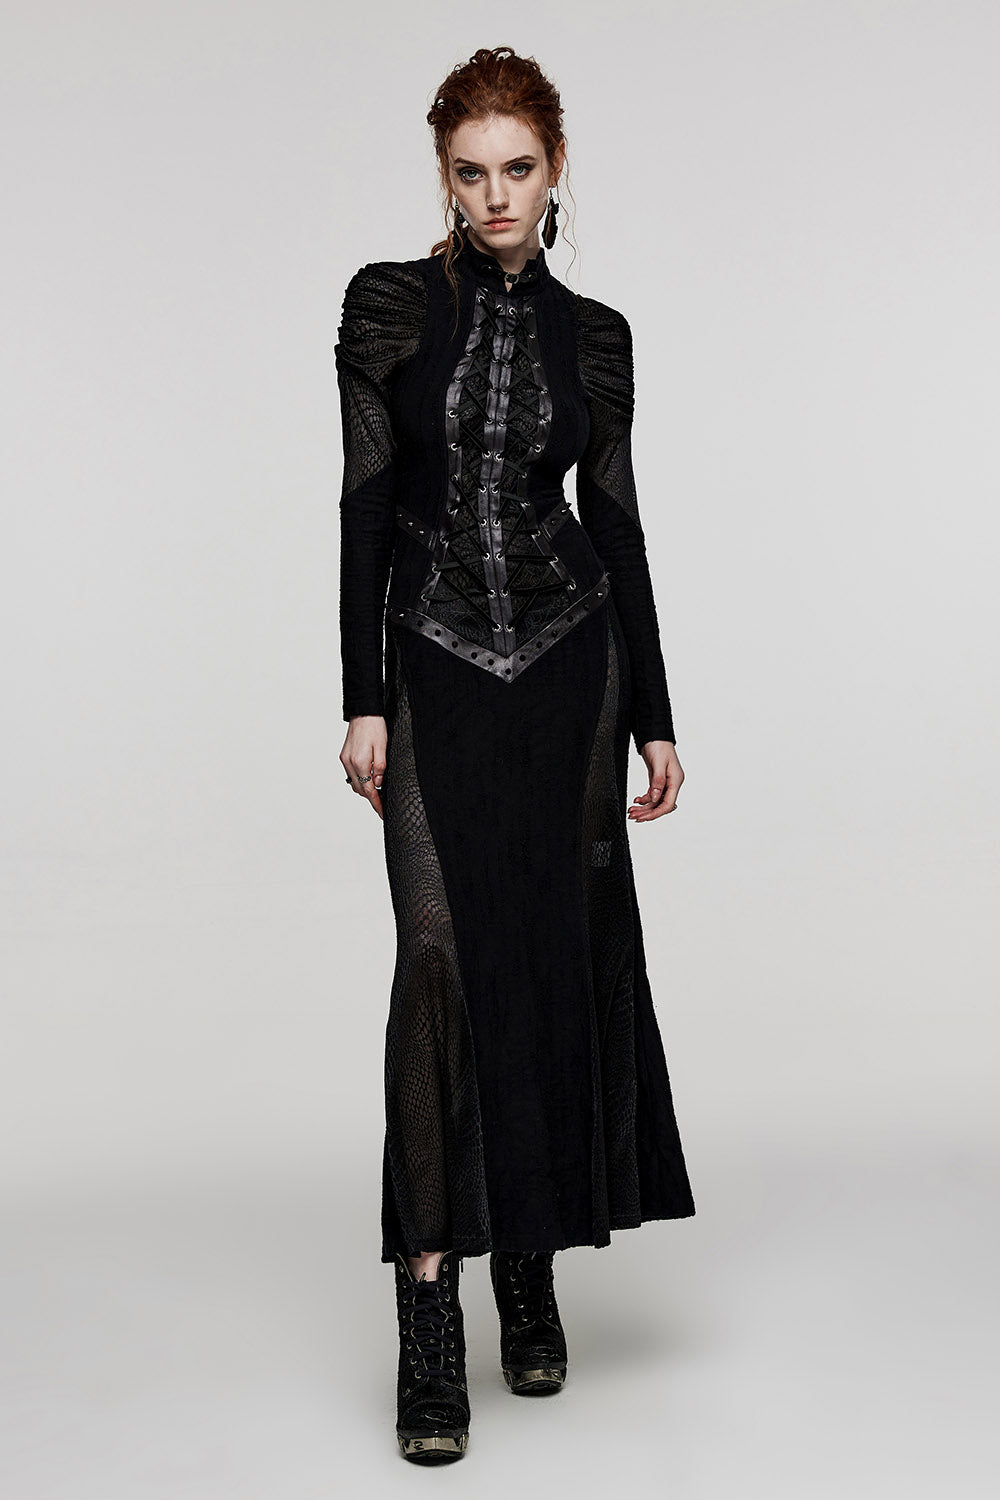 spooky gothic gown for women